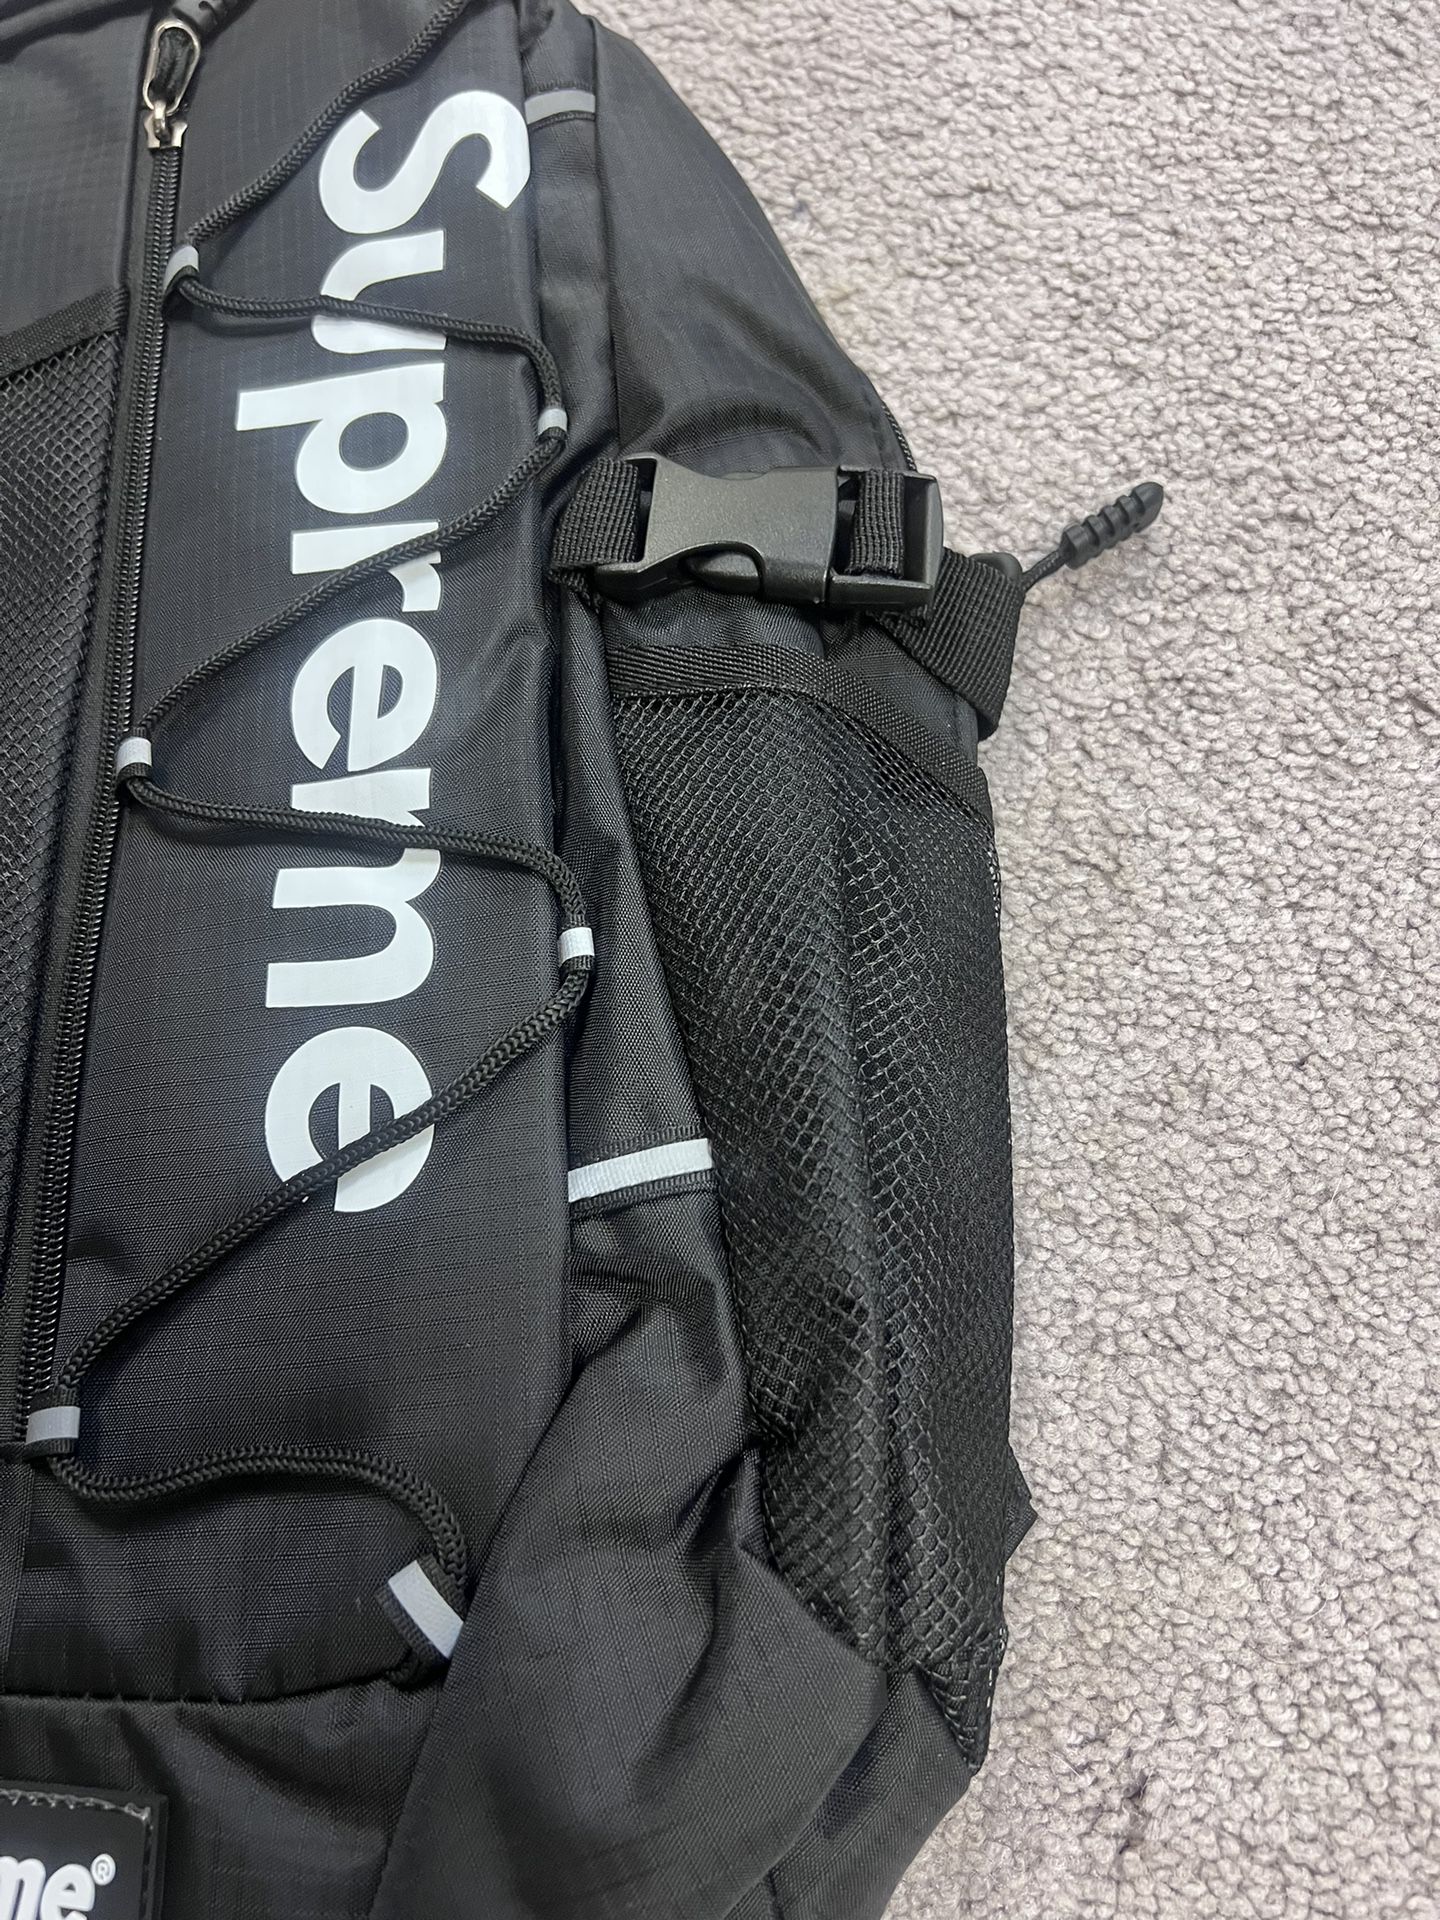 Supreme Full-size Backpack Black for Sale in Albany, NY - OfferUp